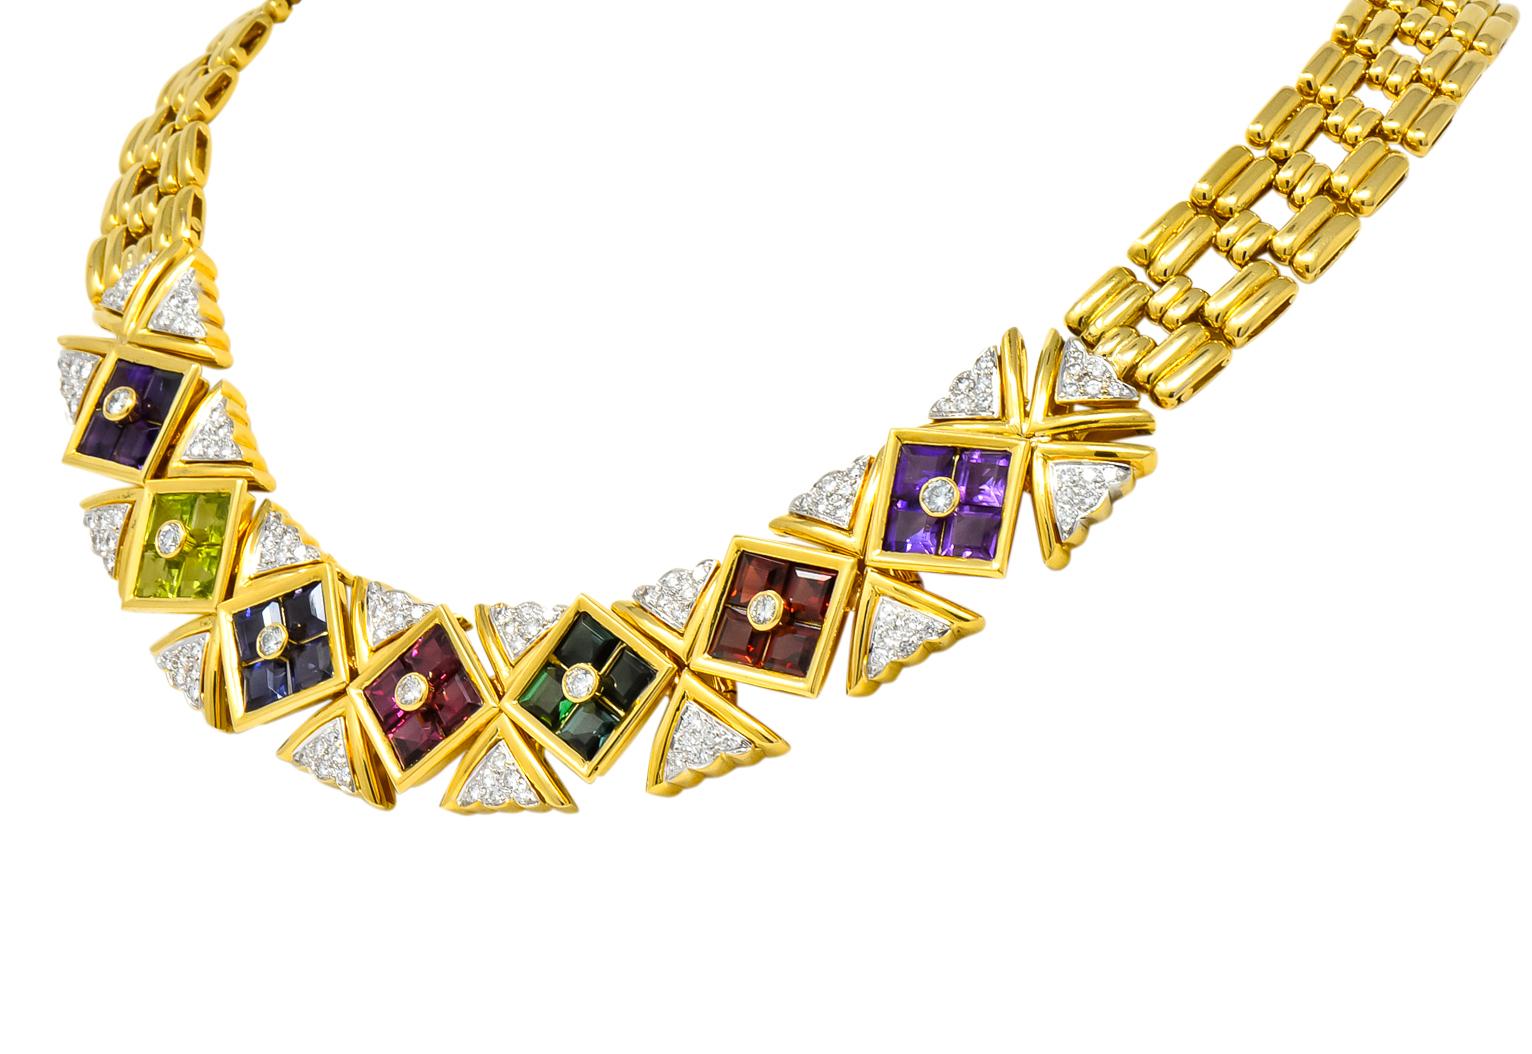 Collar style necklace comprised of ribbed polished gold links with front facing invisible set square cut gemstones in polished gold surrounds

Amethyst, peridot, iolite, garnet, and pink and green tourmaline weighing approximately 10.20 carats